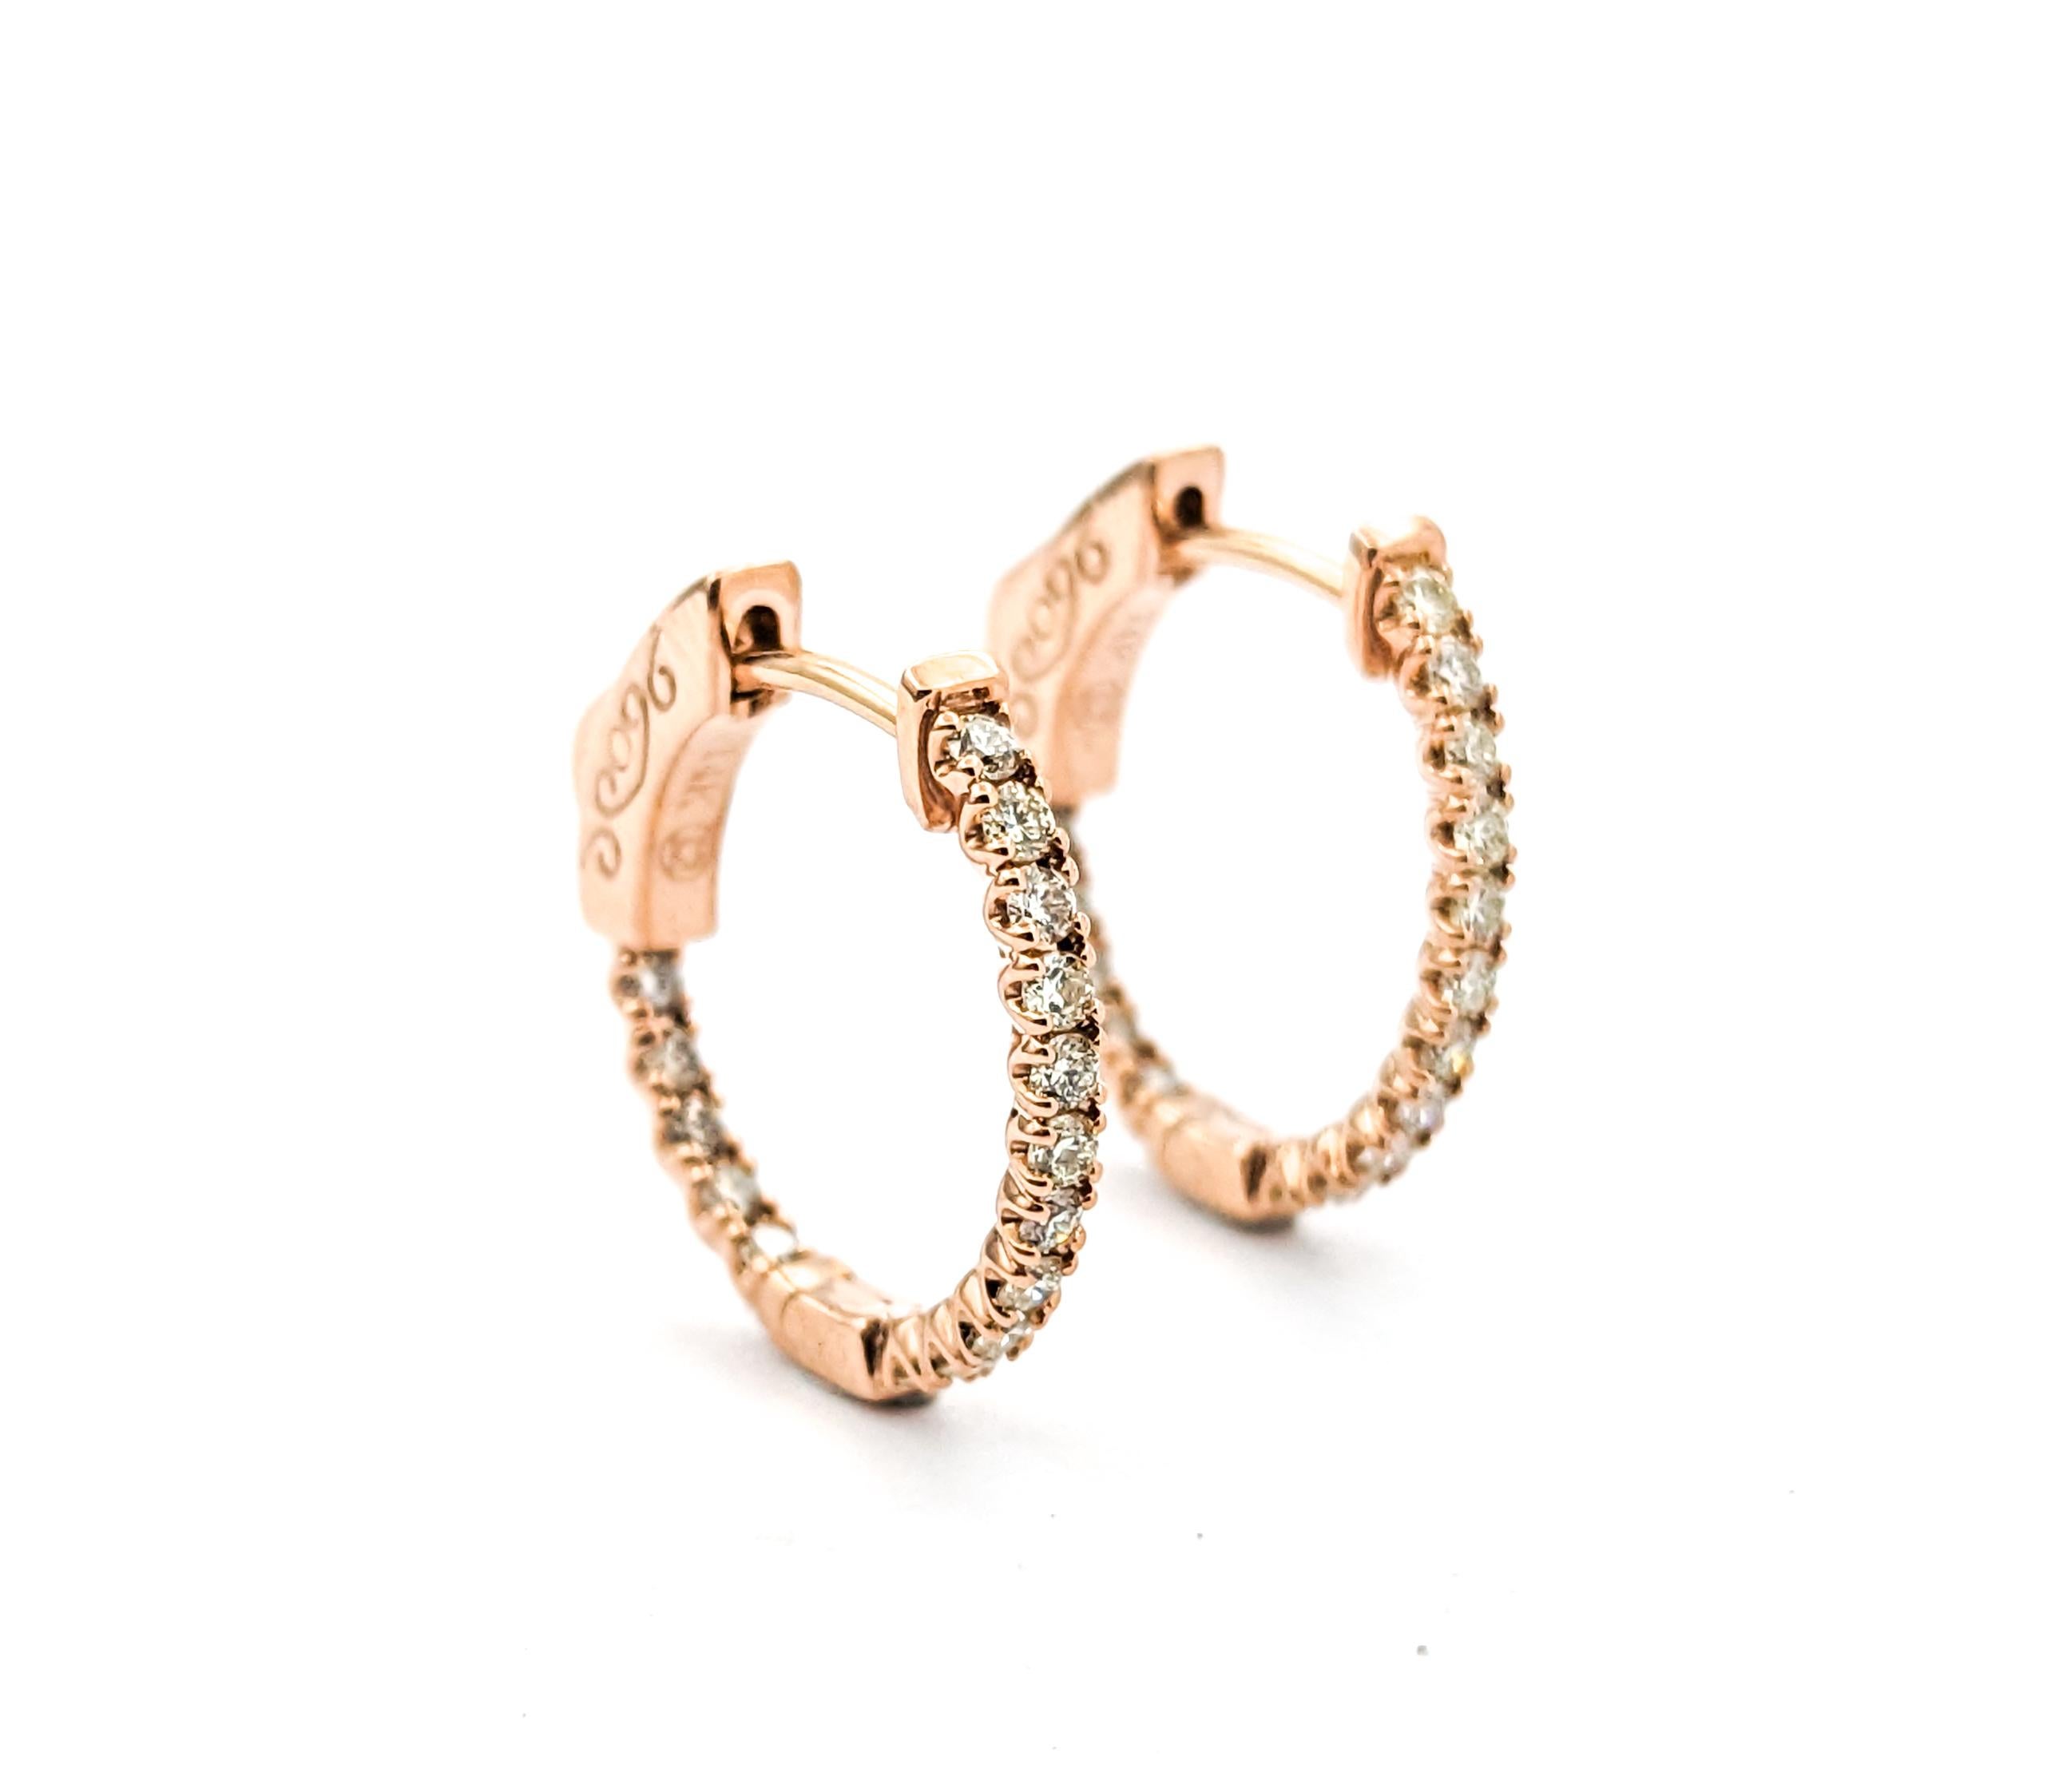 Inside/Outside Diamond Hoops Earringds In Rose Gold In Excellent Condition For Sale In Bloomington, MN